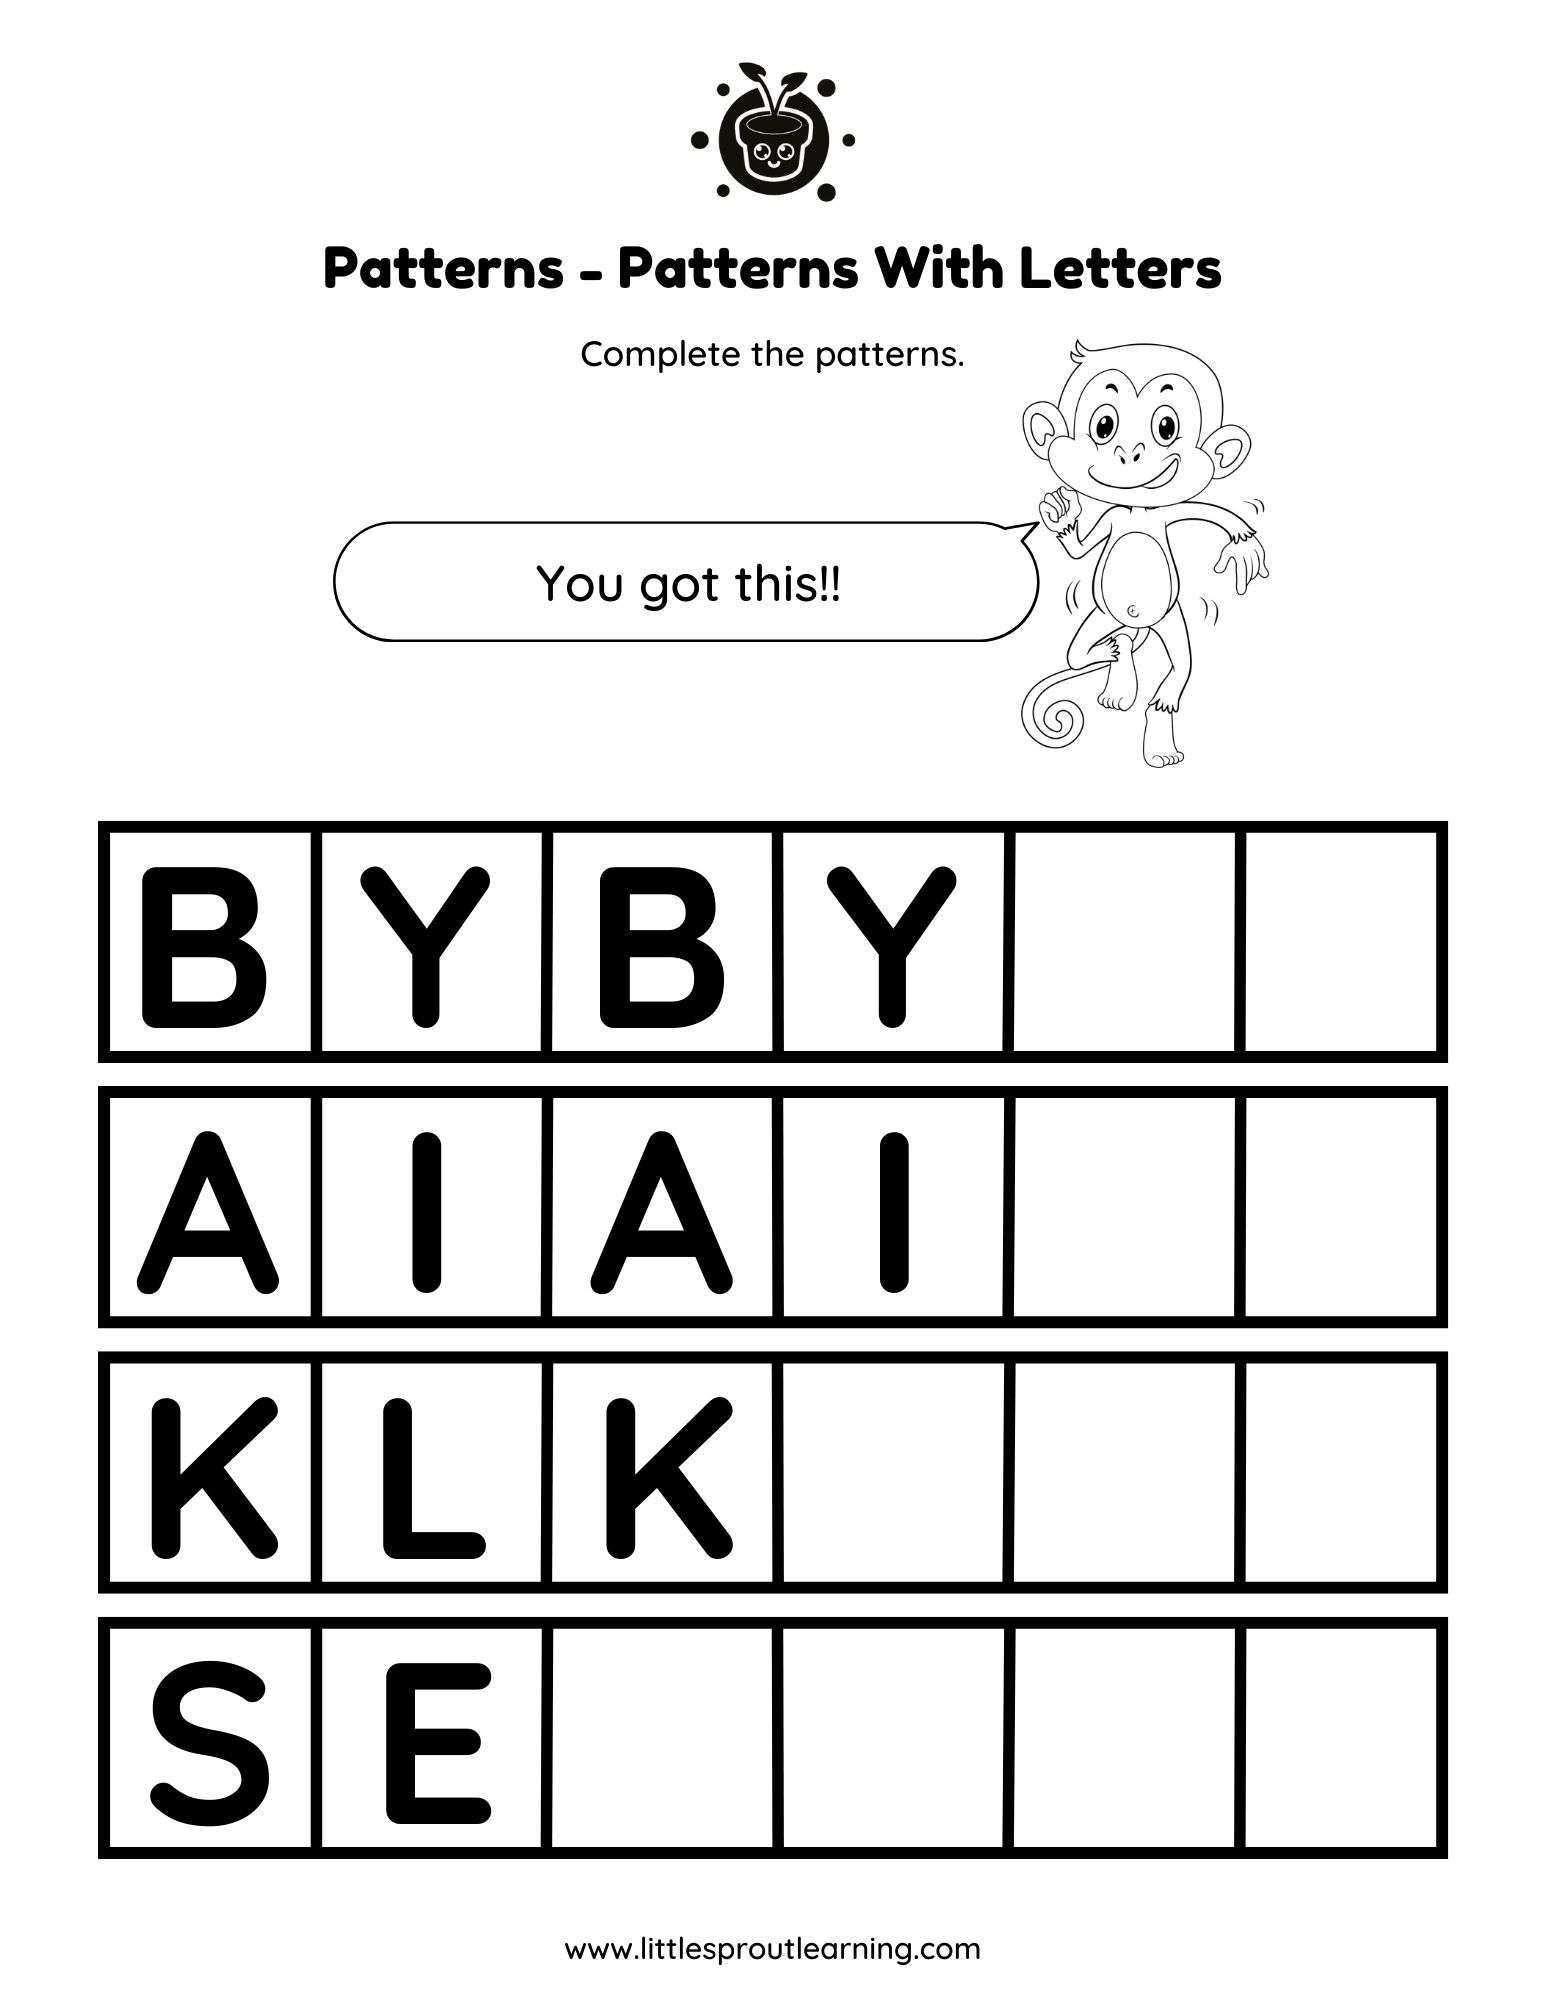 Feature of Patterns with Letters Worksheet